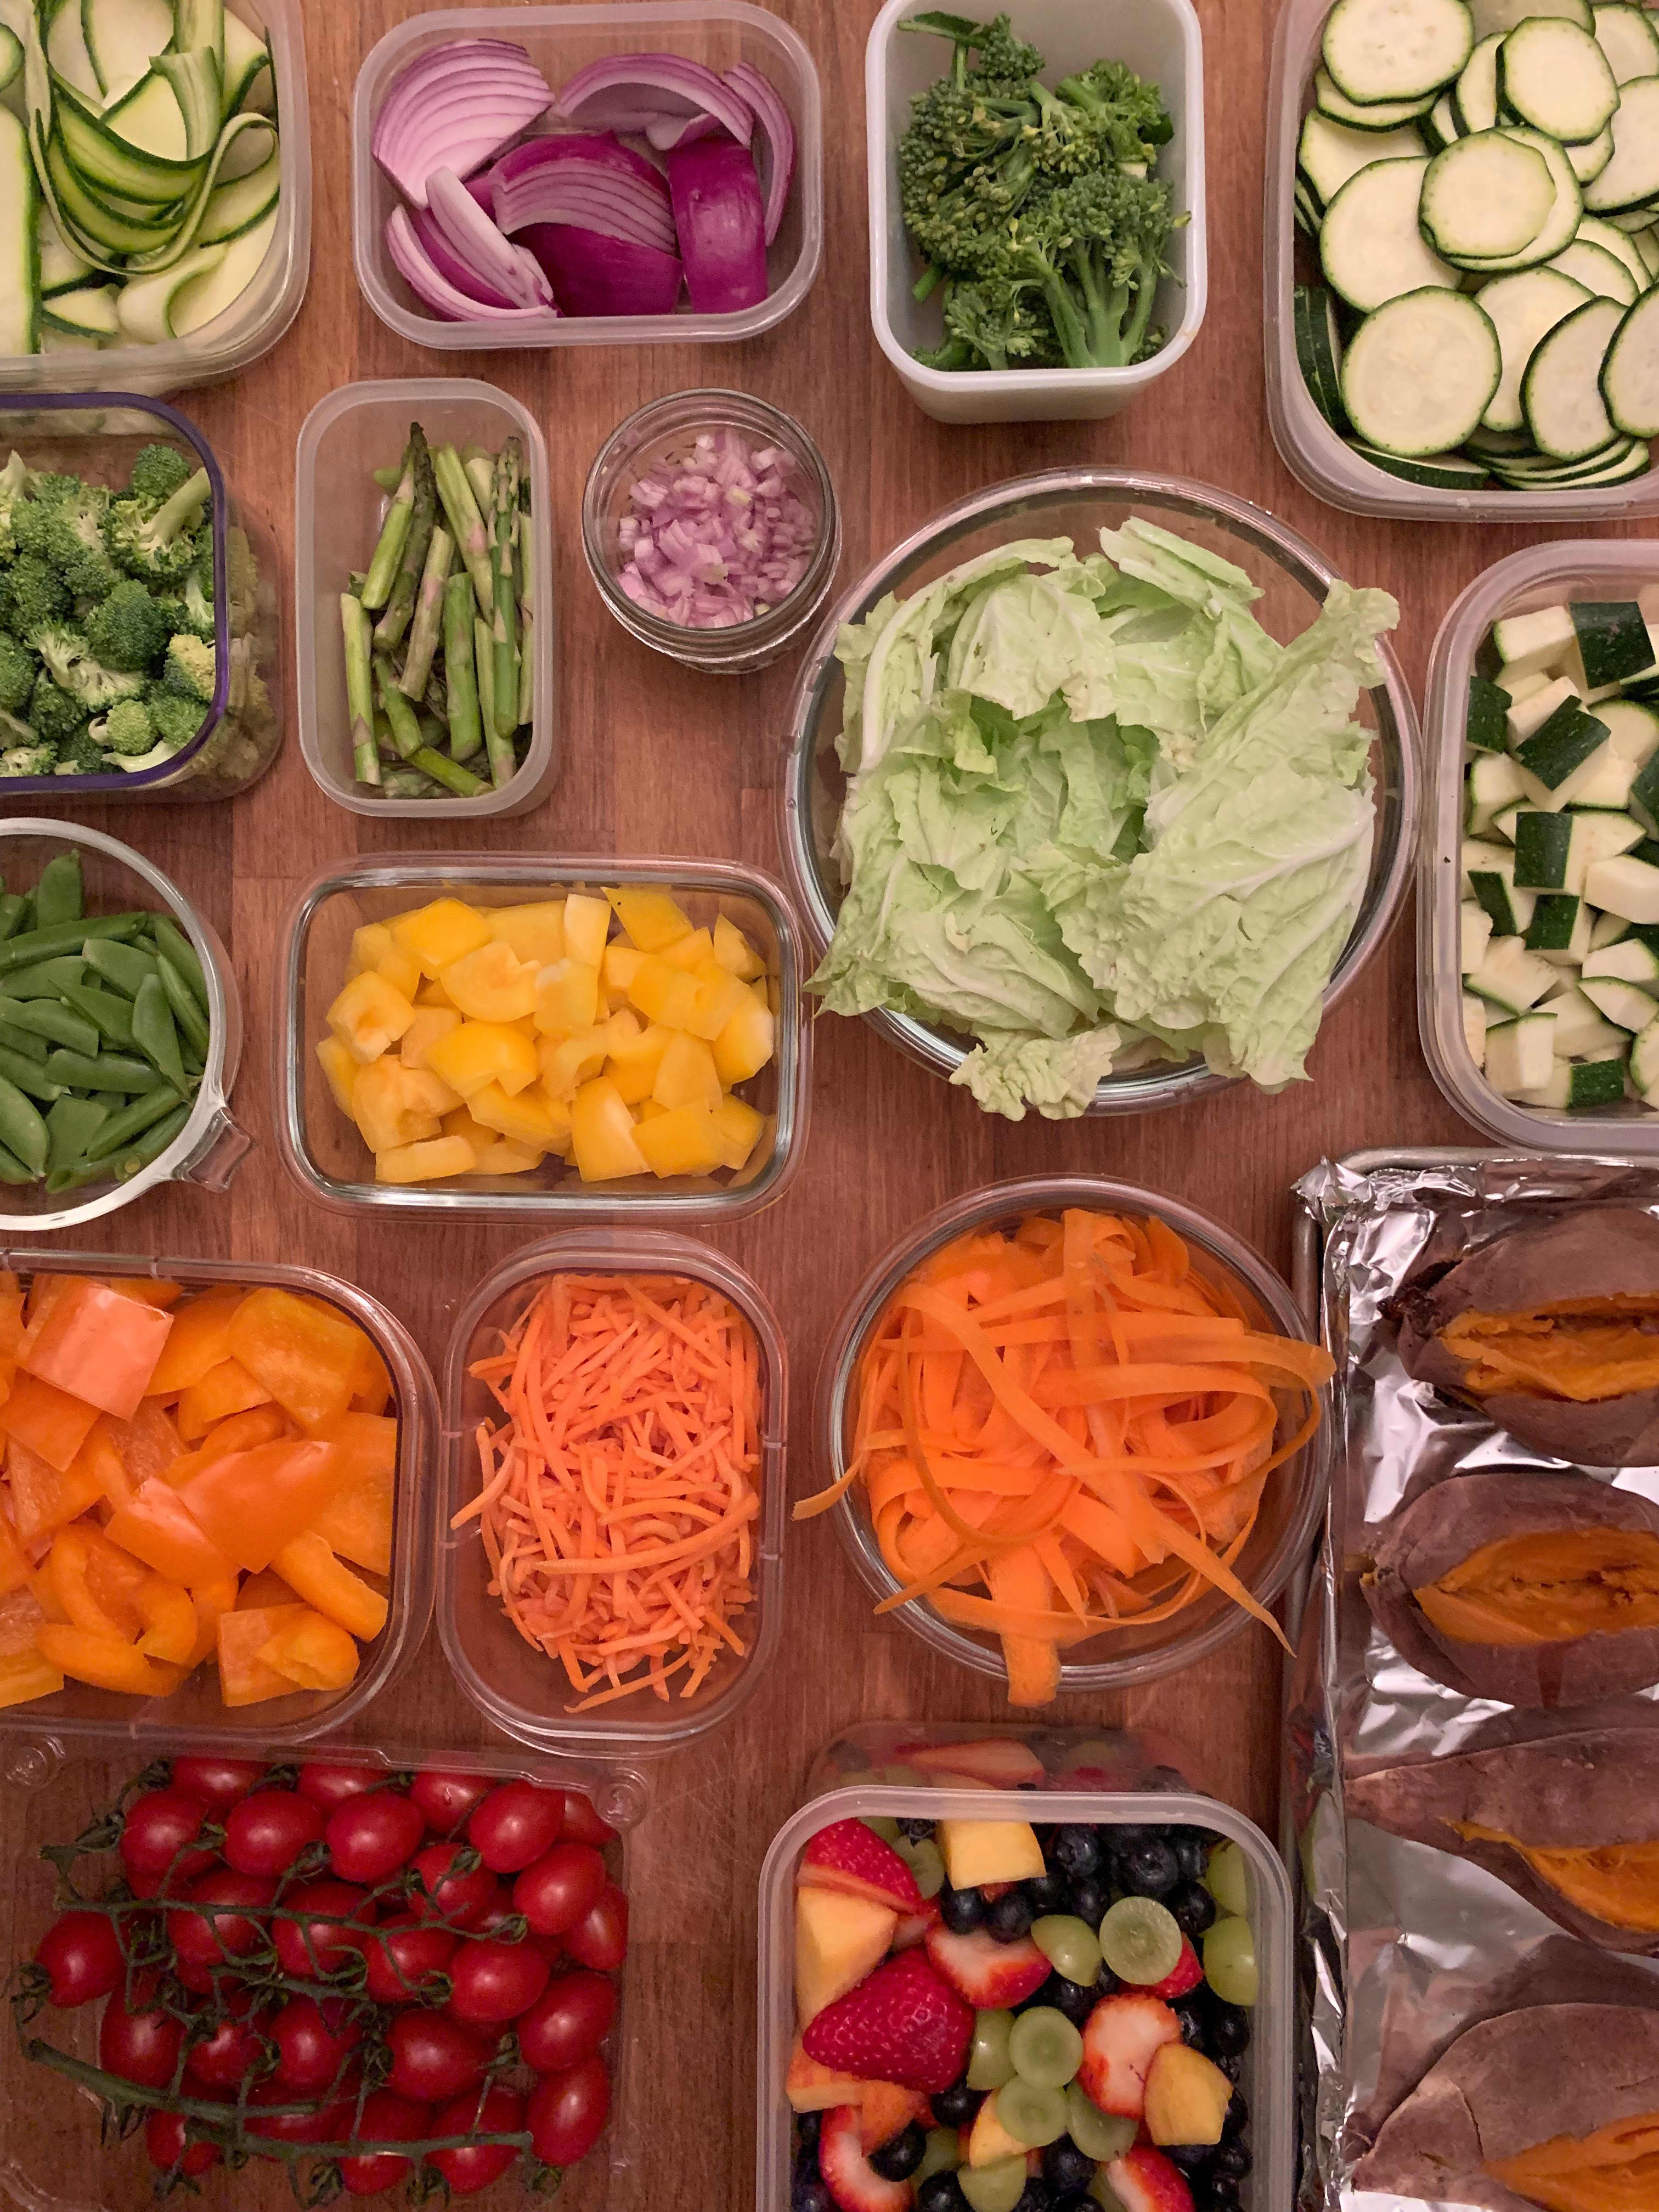 Meal Prep Plan: How to Prep a Week of Colorful Kid-Friendly Meals